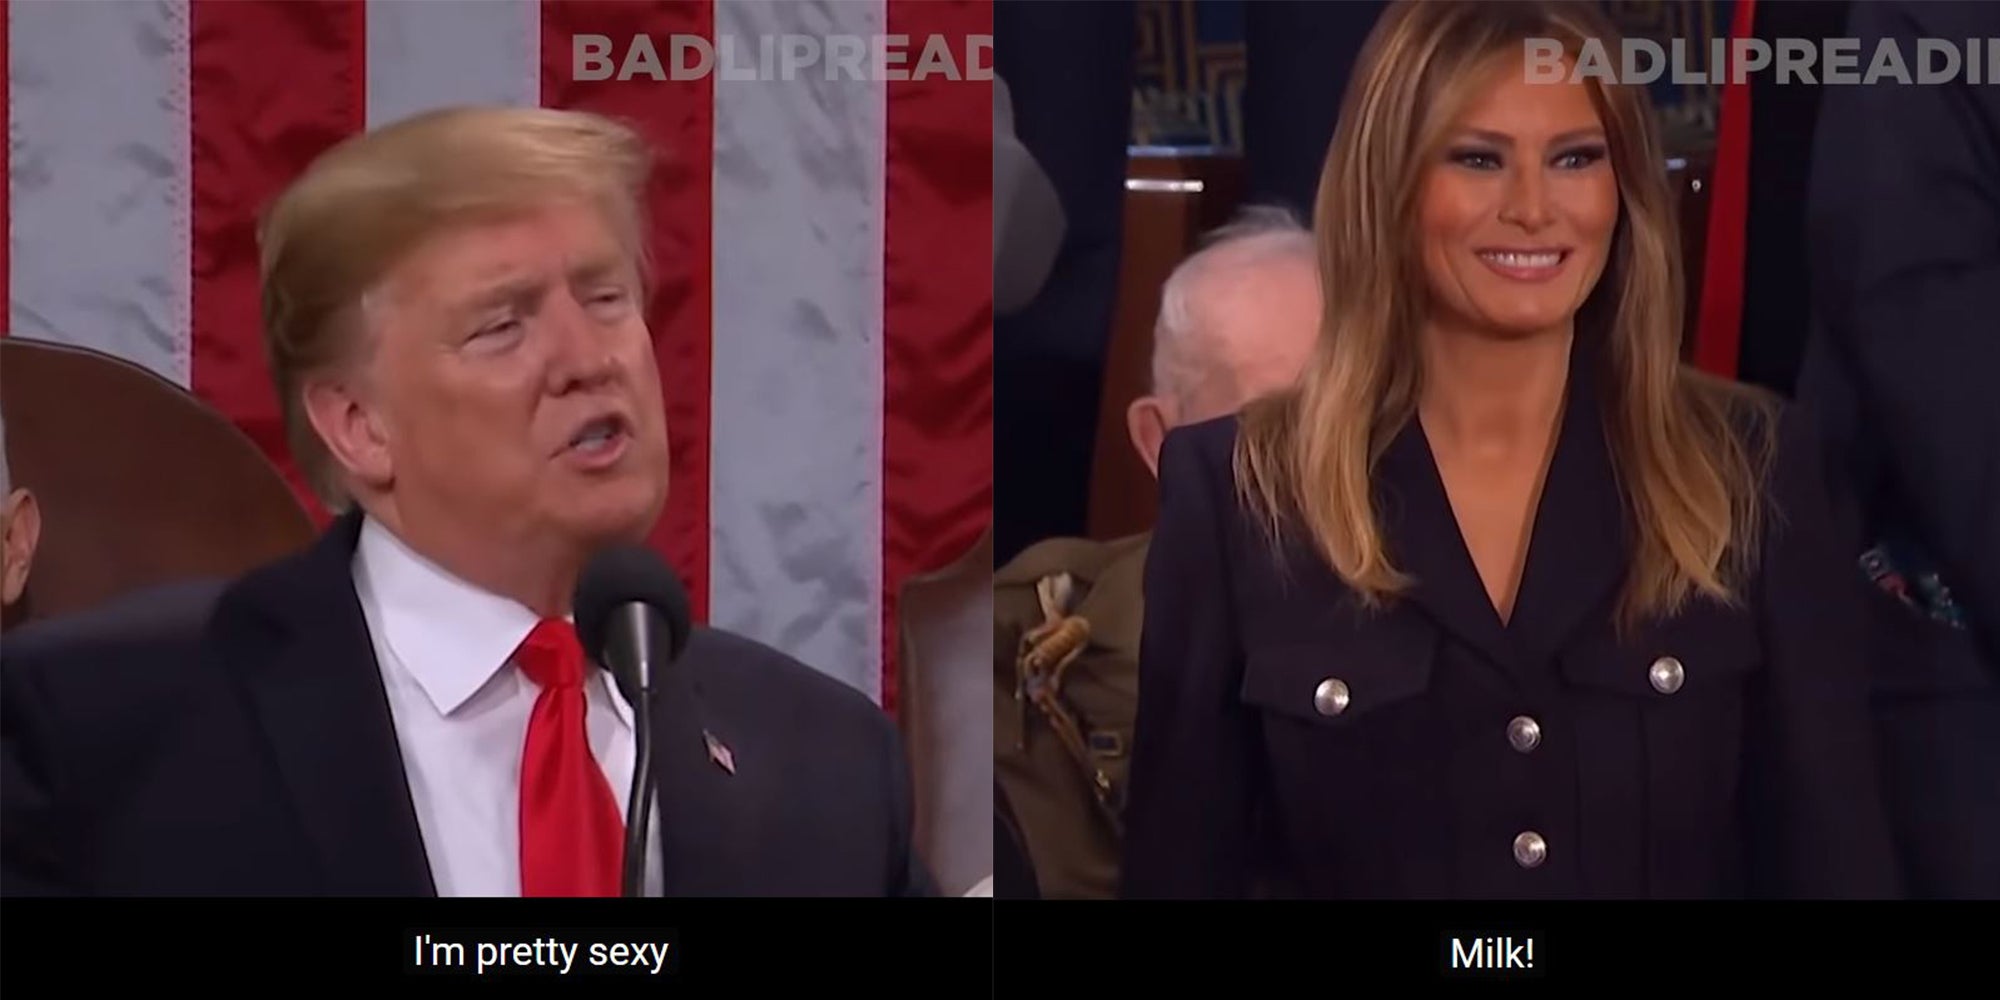 The Bad Lip Reading video of Donald Trump's State of the Union address